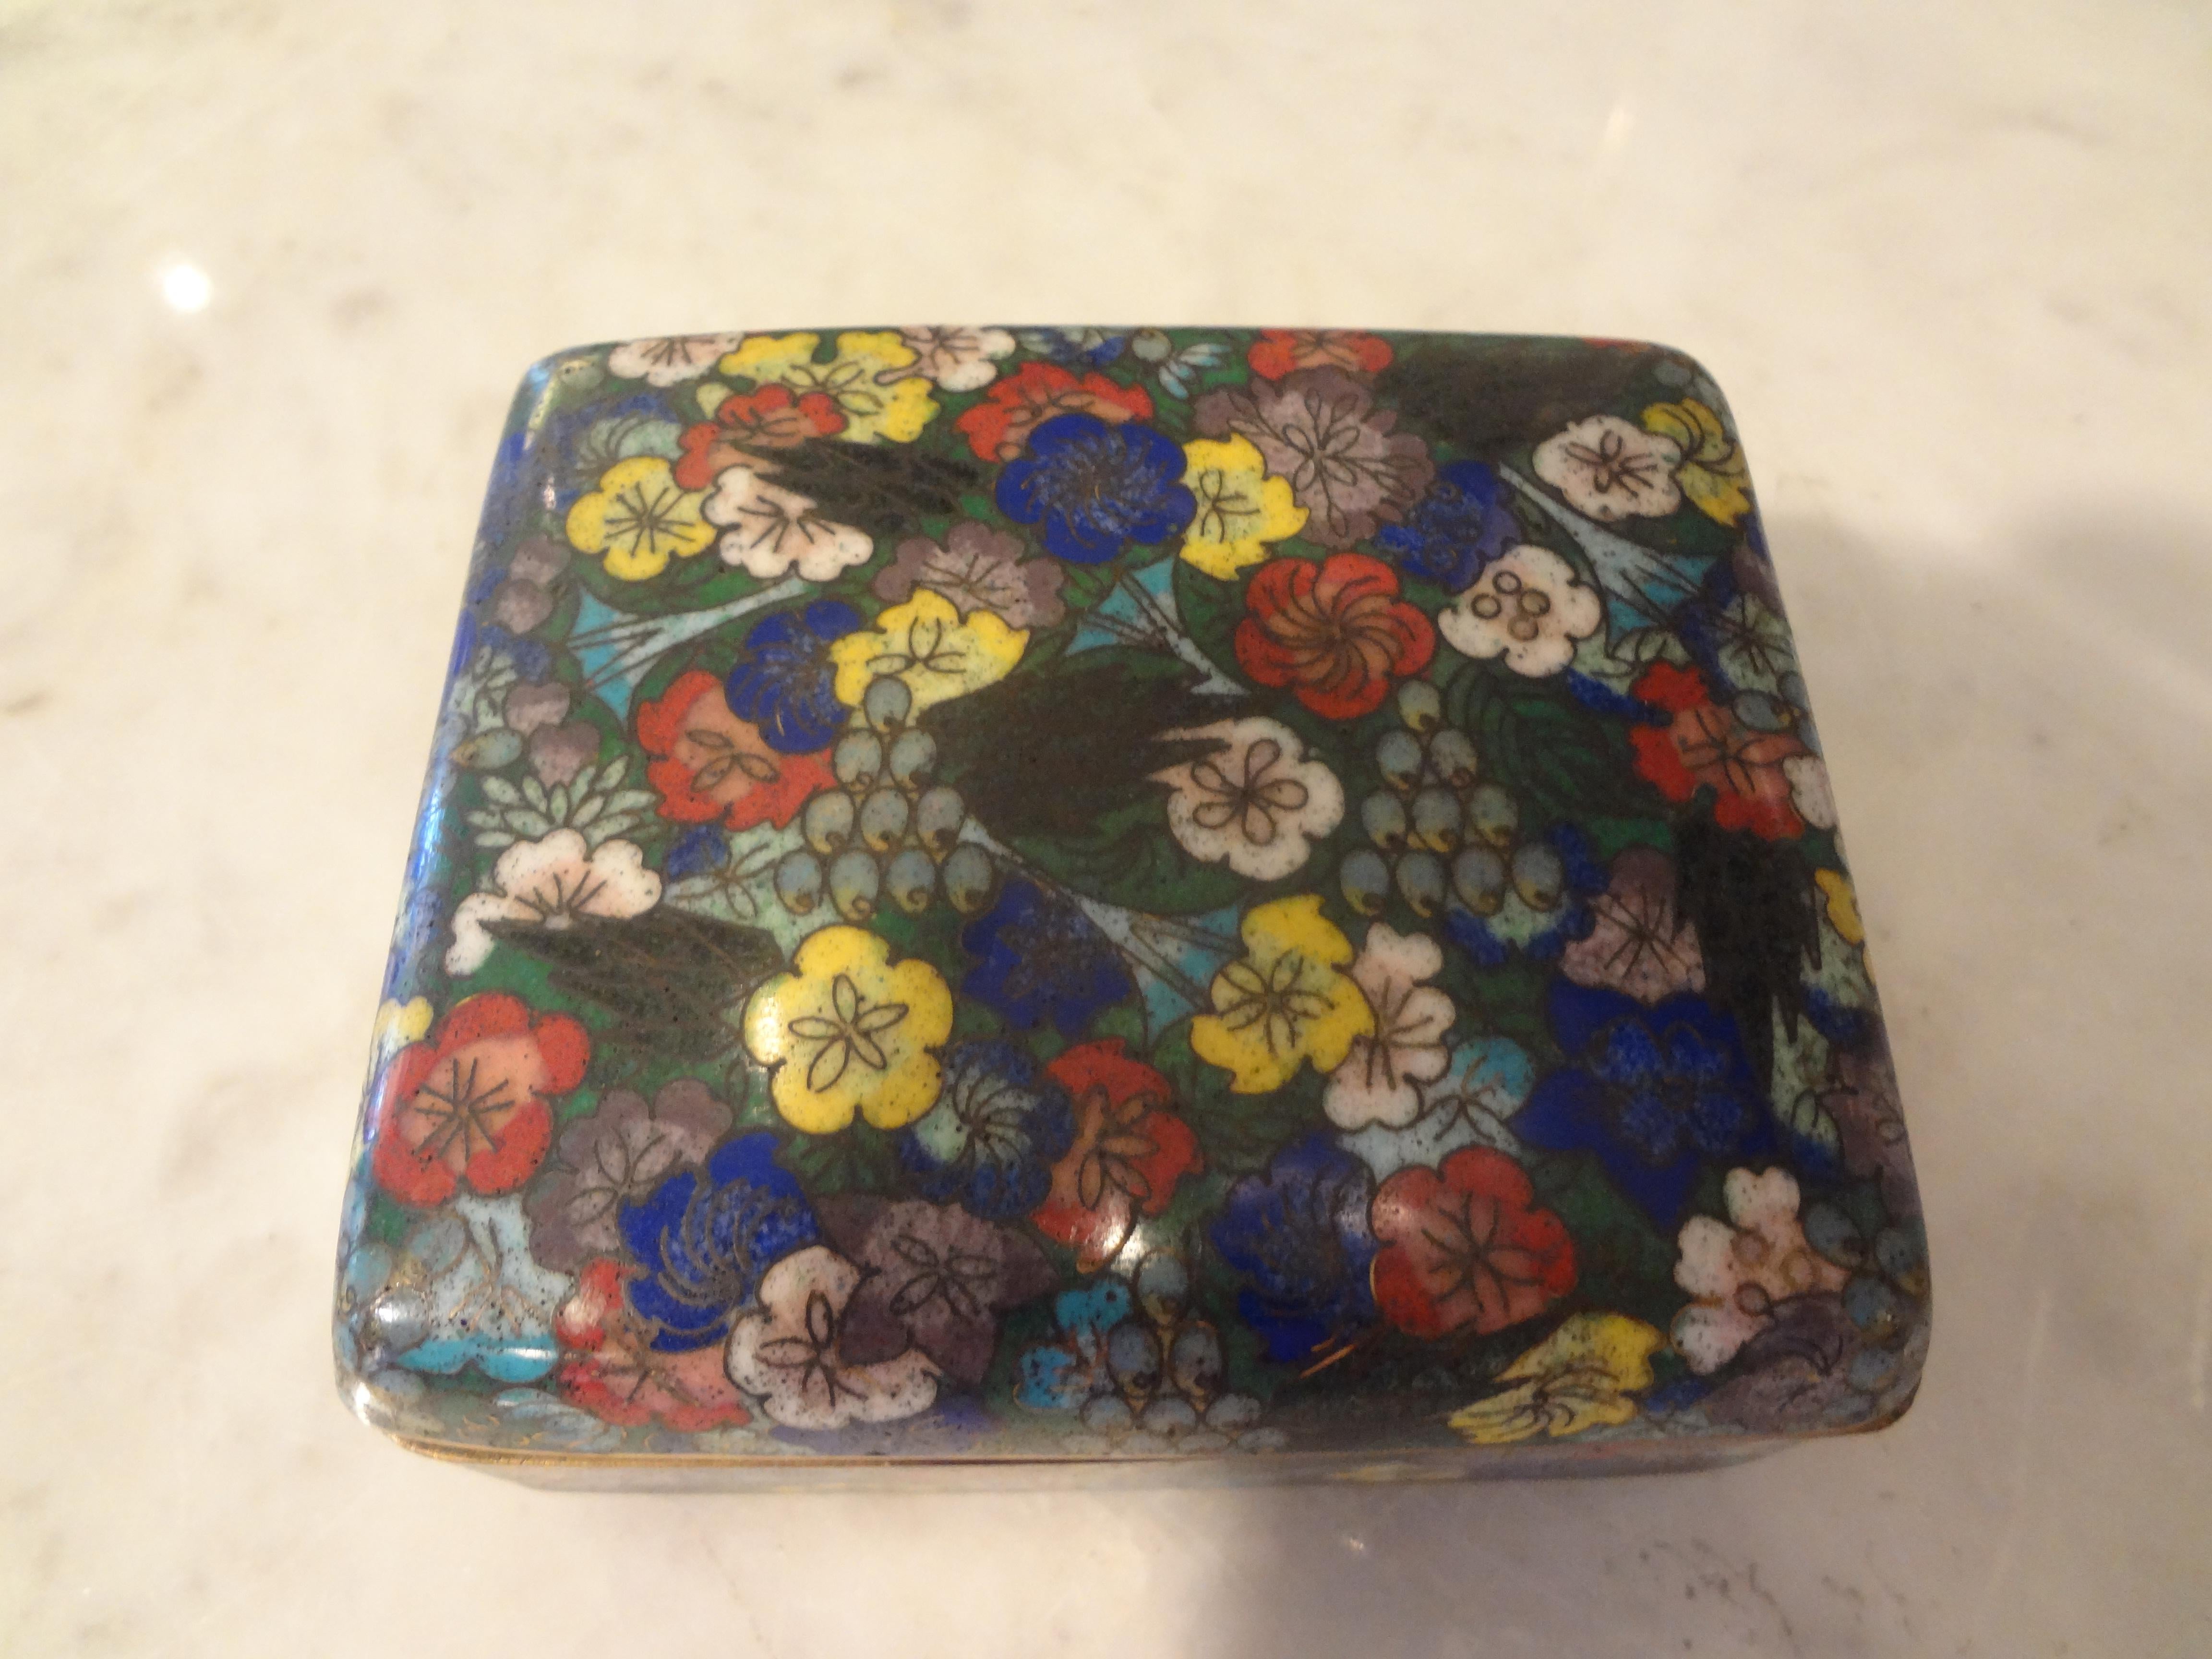 Lovely Chinese export cloisonné box made of brass and enameled with a beautiful floral pattern resting on ball feet. This chinoiserie box is marked china and dates from 1900-1920. This decorative box was most likely a cigarette box or trinket box